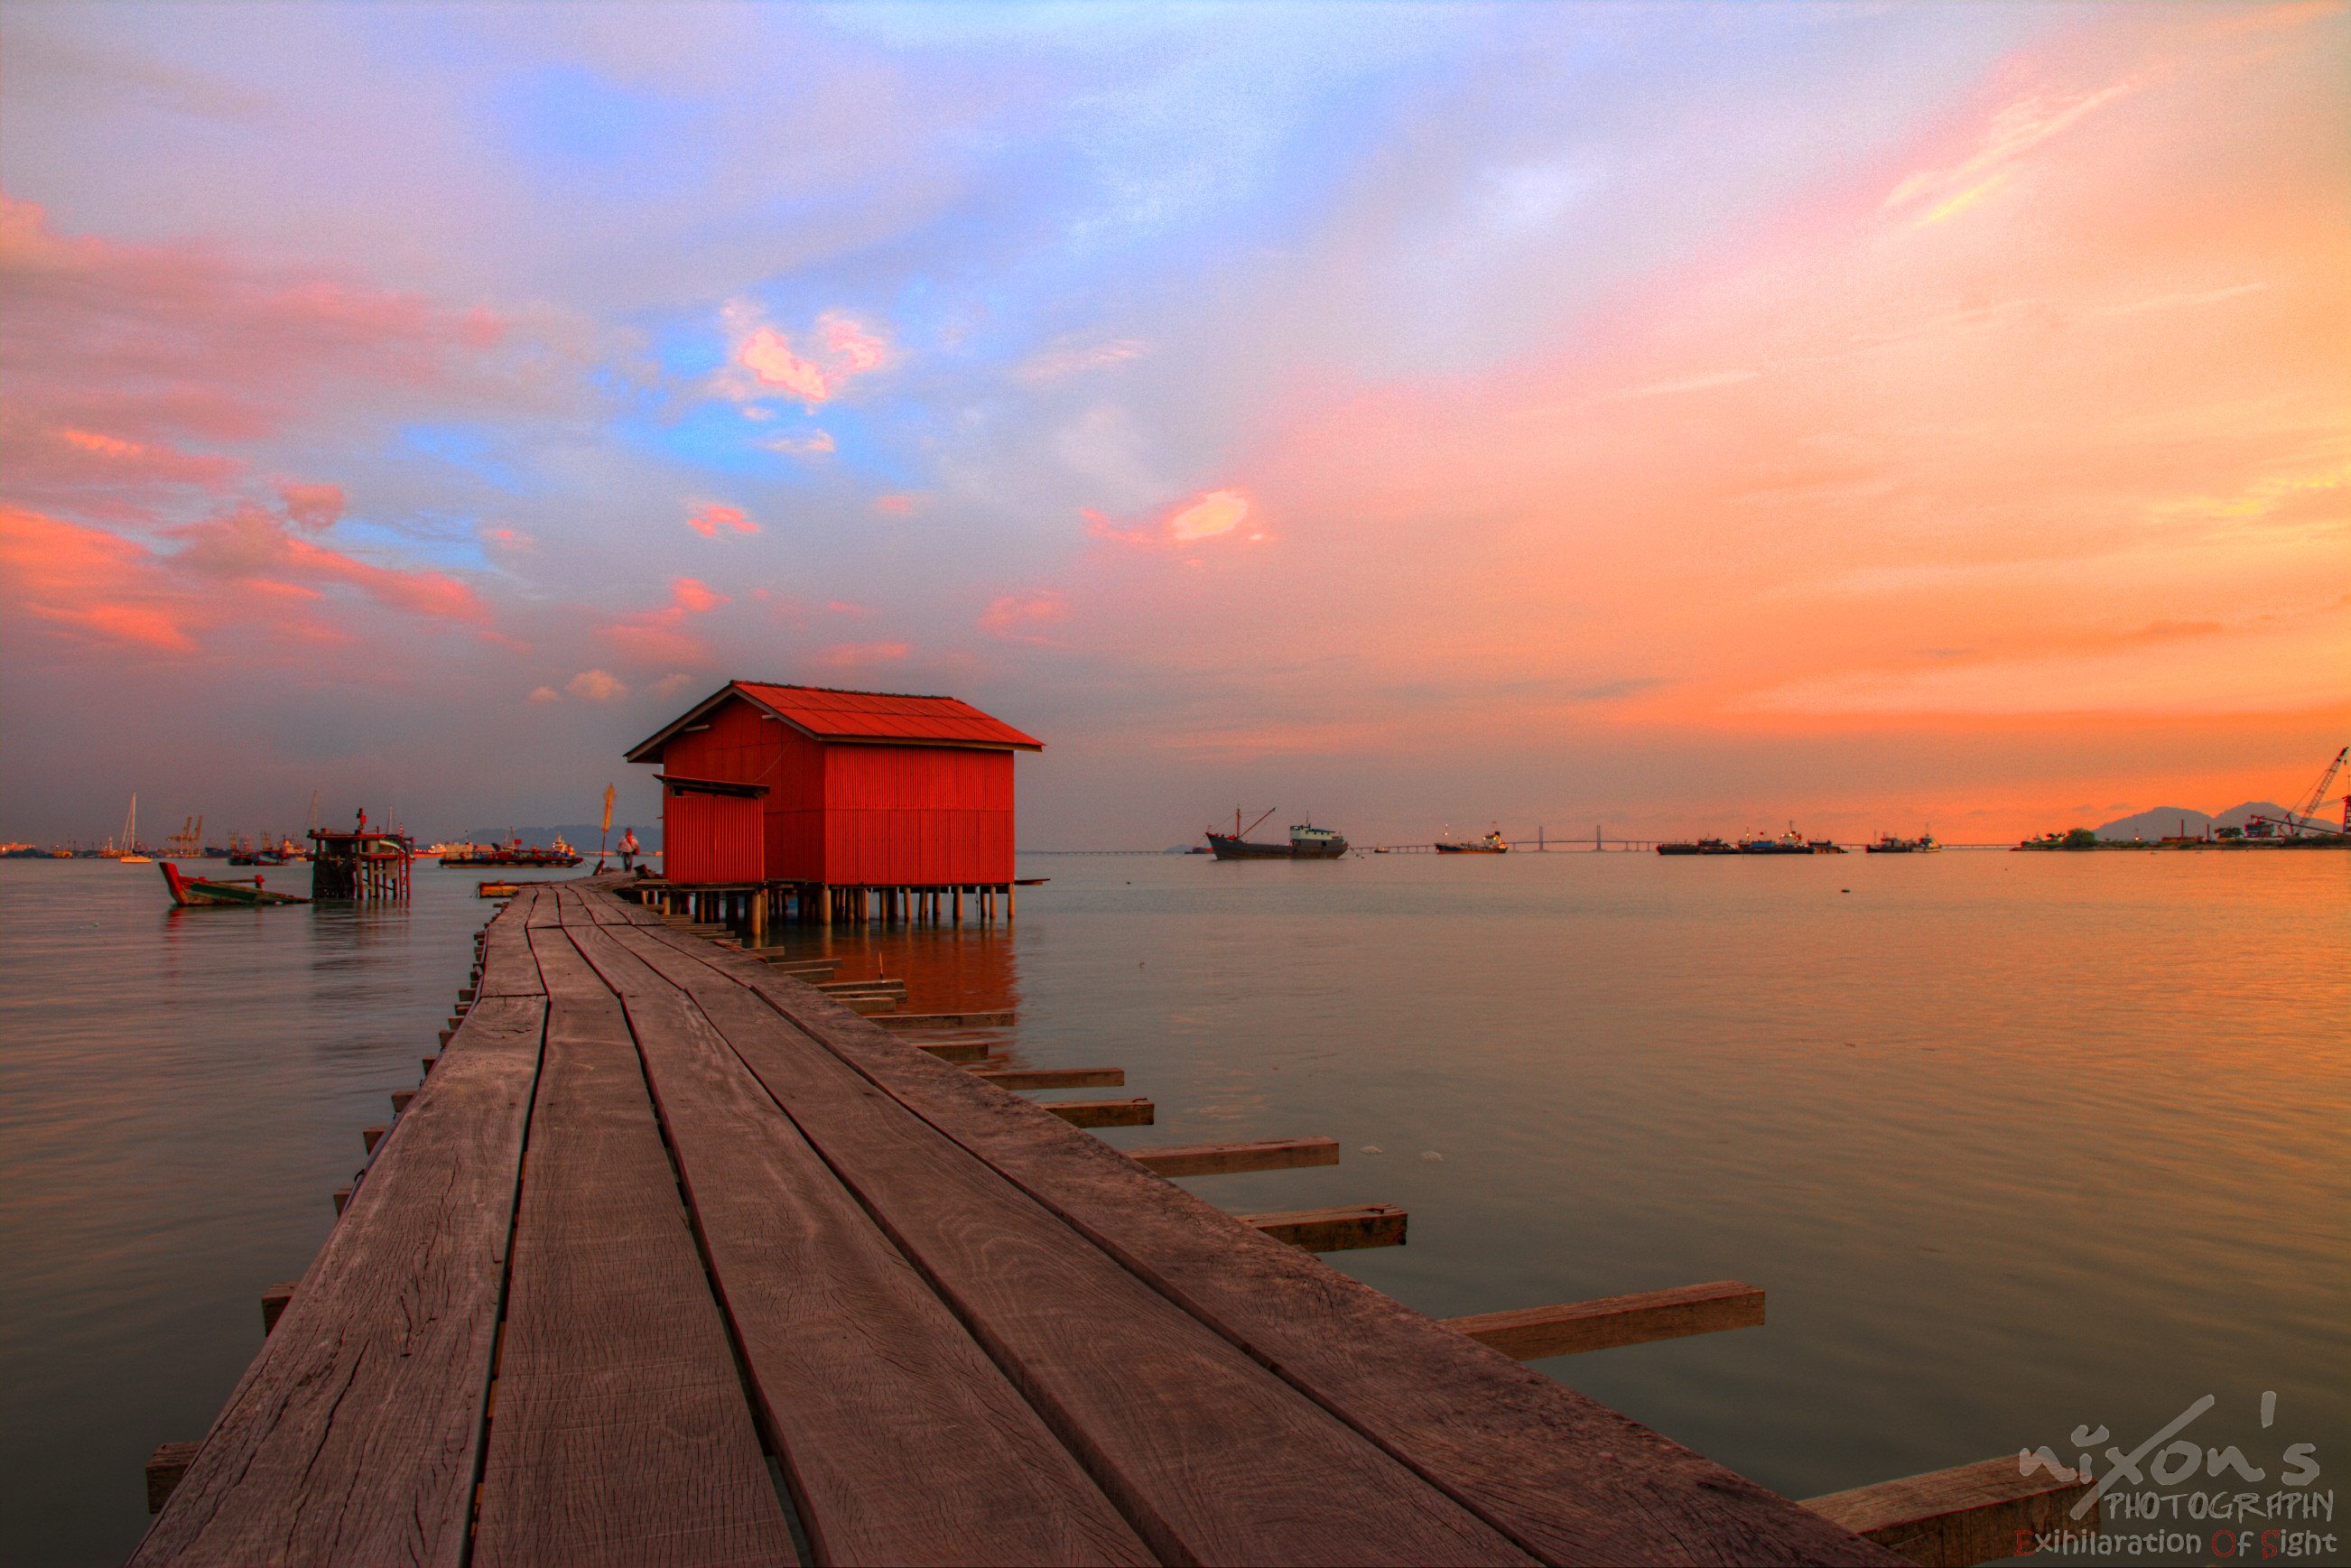 Sunset view of Tan Jetty